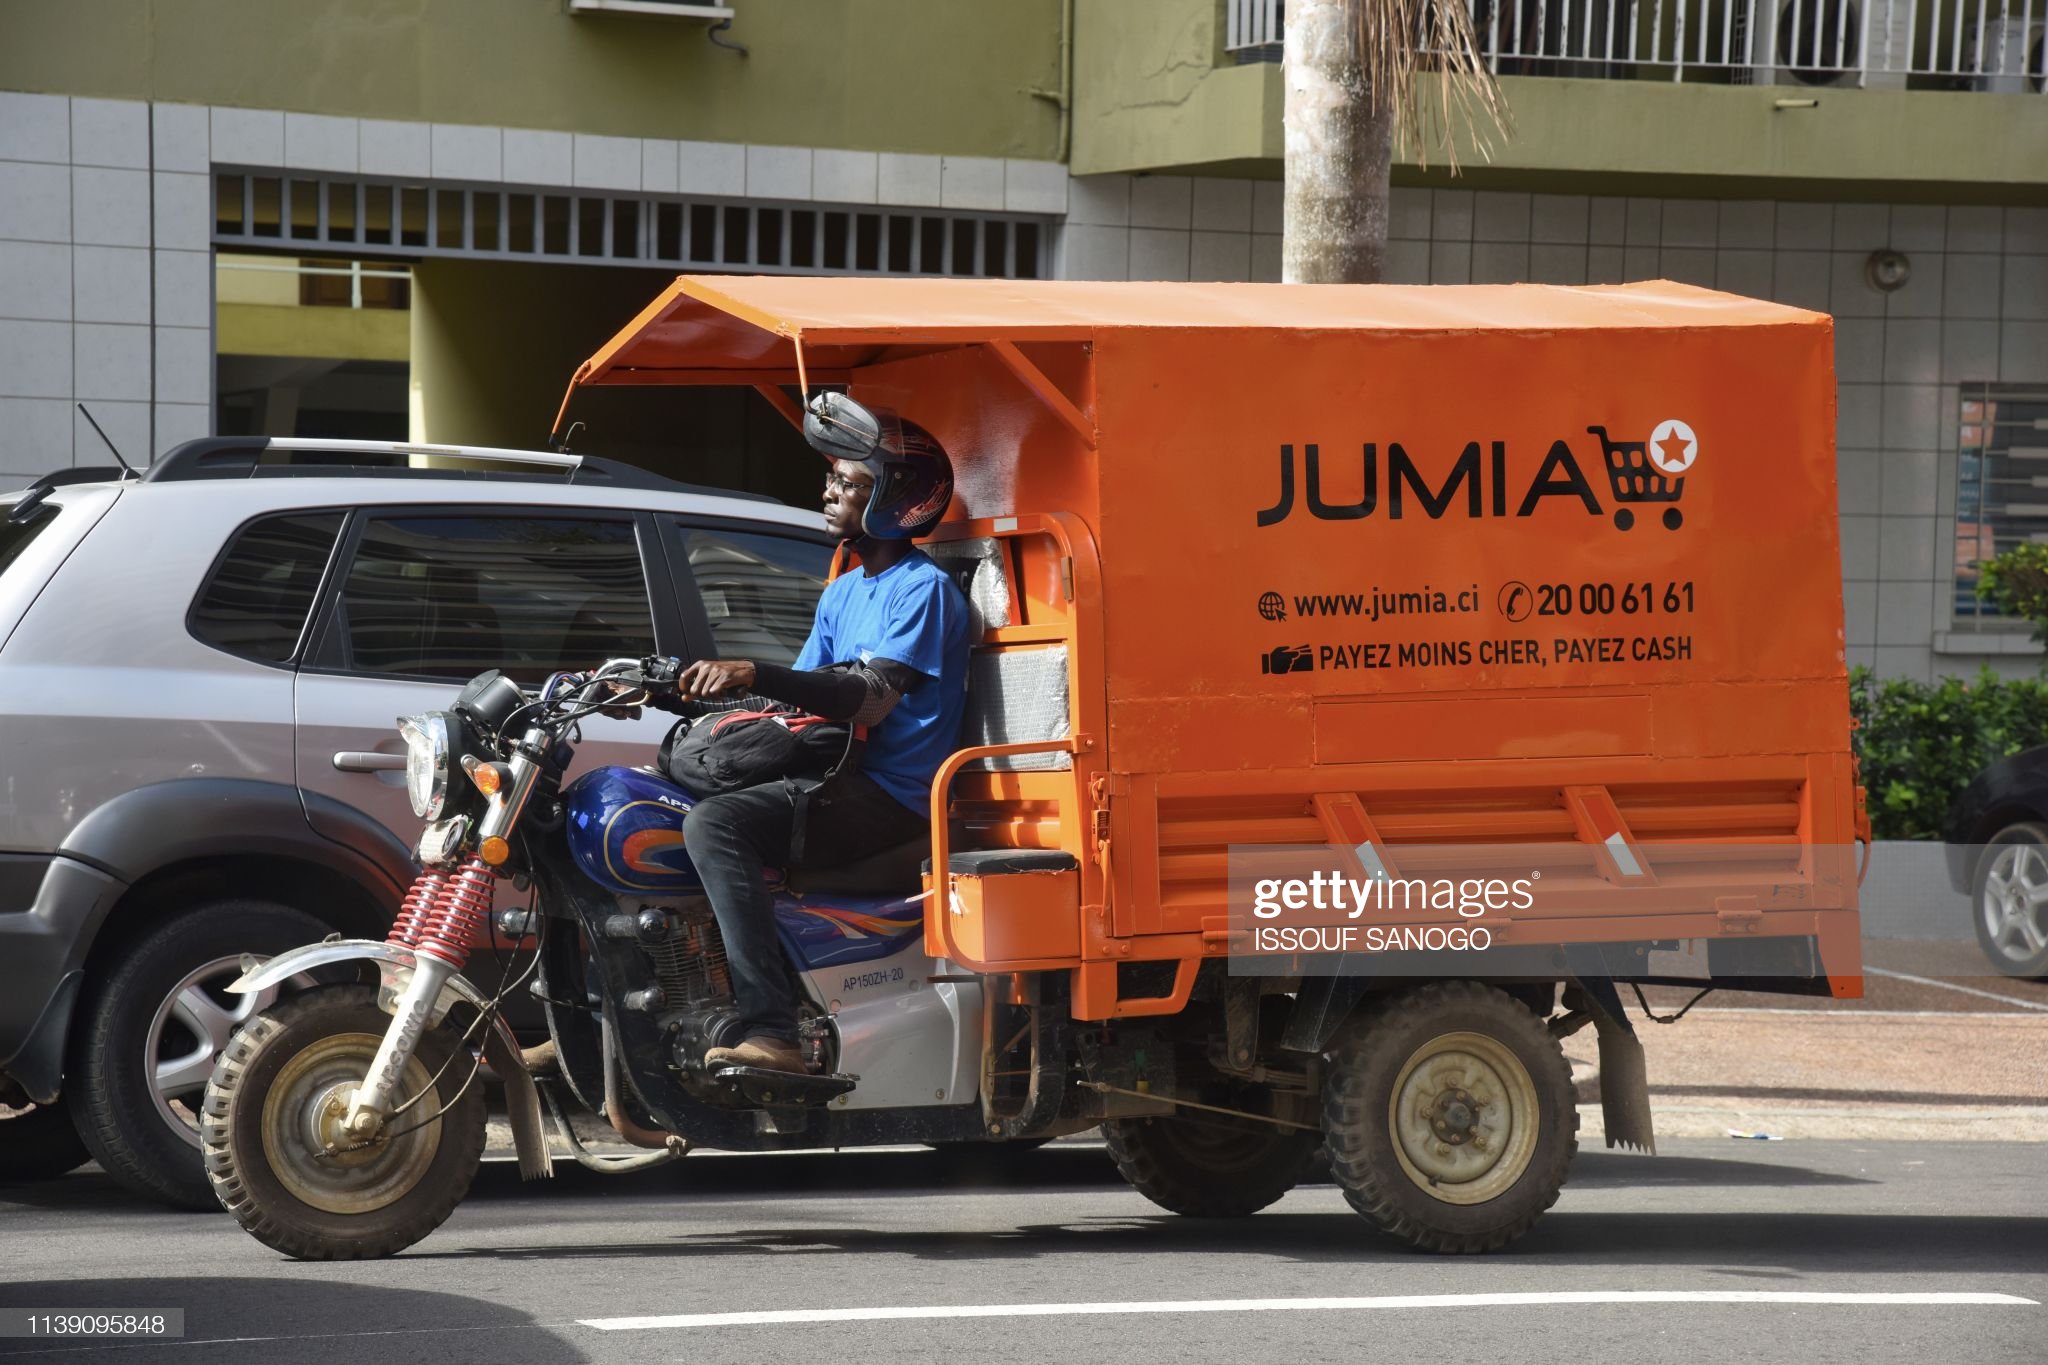 A delivery man drives a transporter with an advertisement for Nigeria's e-commerce site Jumia in the Plateau district of Abidjan on April 24, 2019. - Jumia, the e-commerce site based in Nigeria, became on April 12, 2019 the first African start-up to make its debut on Wall Street. (Photo by ISSOUF SANOGO / AFP)        (Photo credit should read ISSOUF SANOGO/AFP via Getty Images)